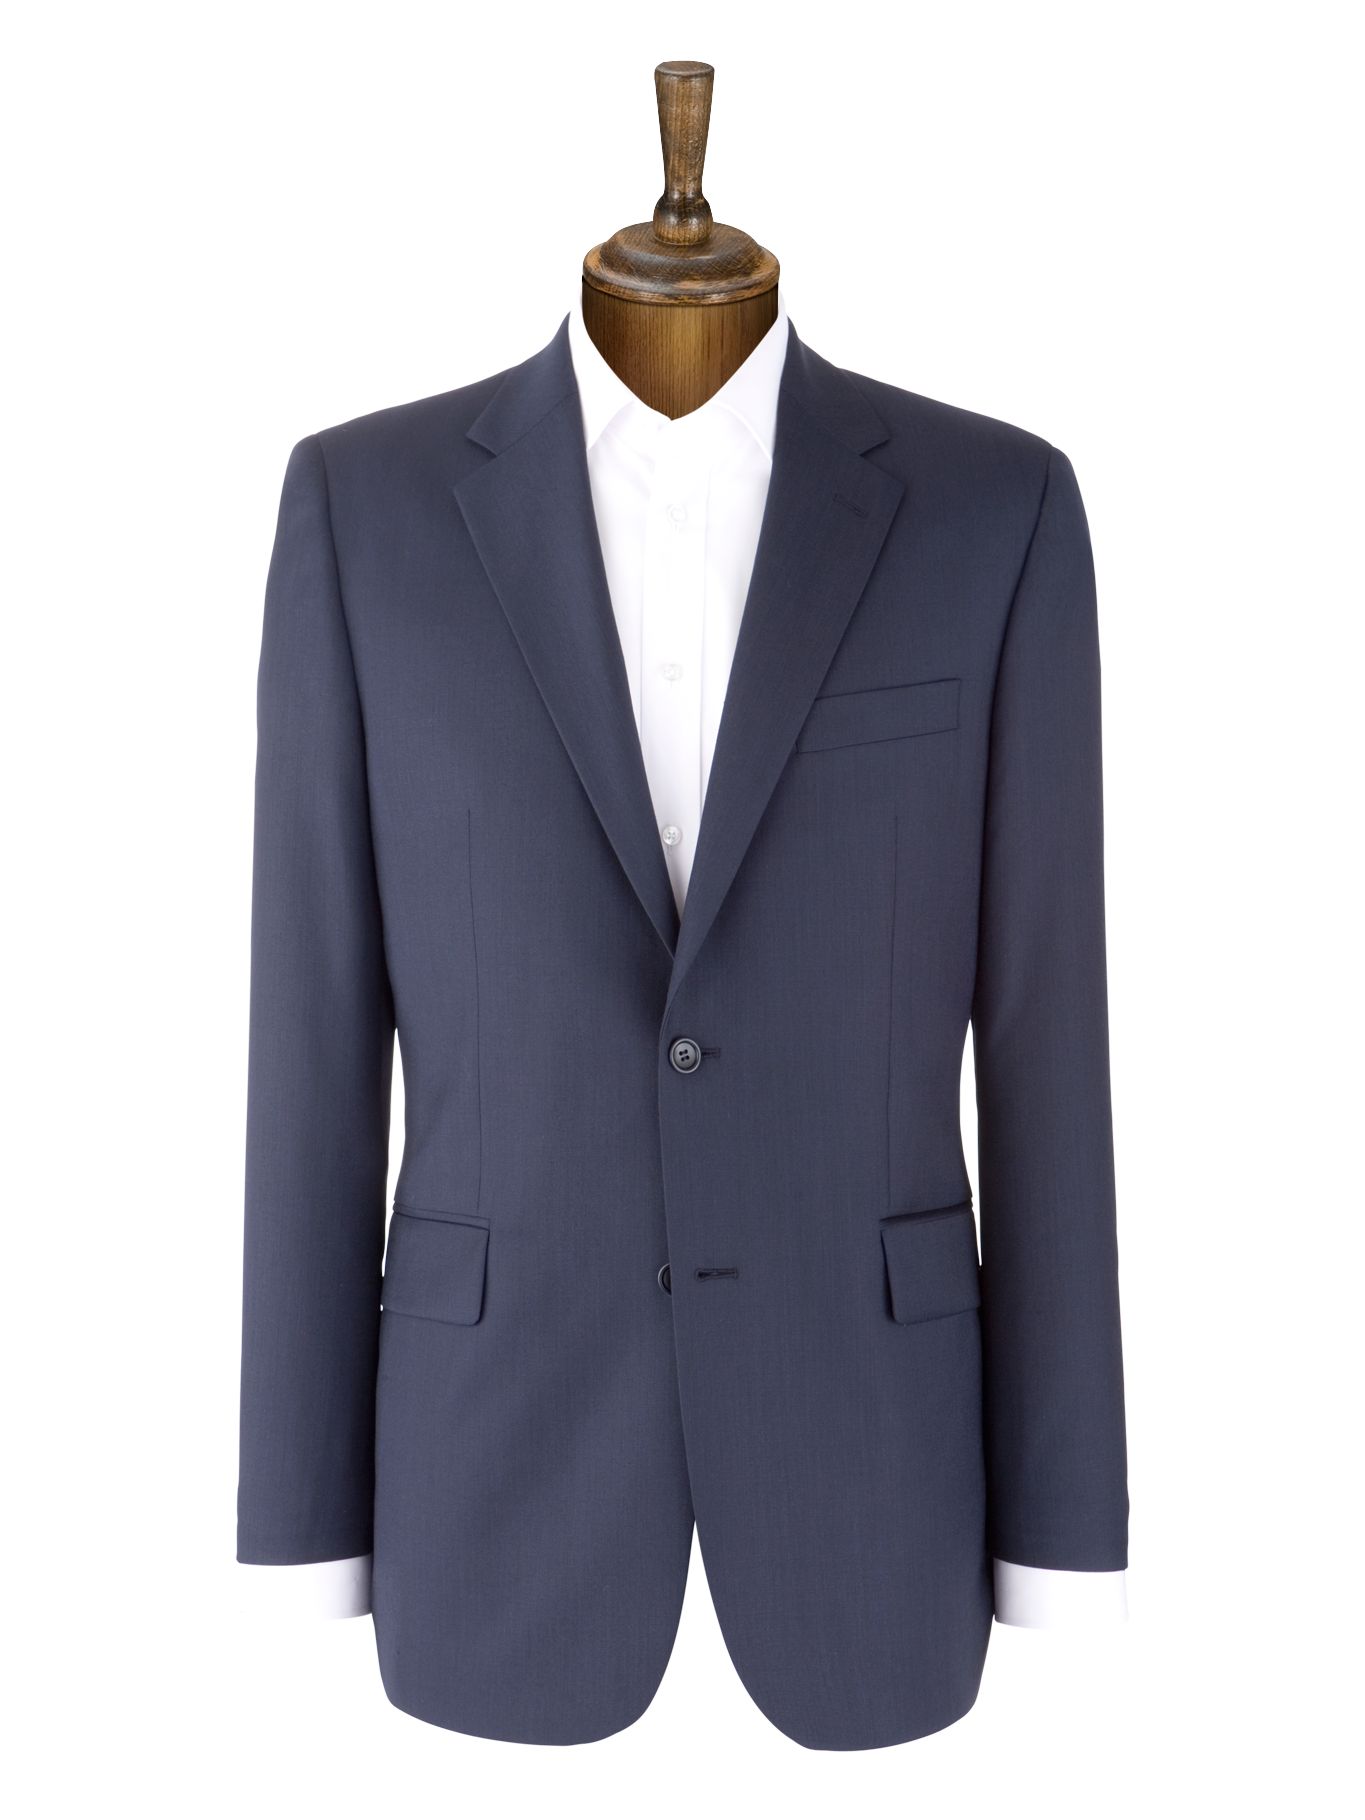 Chester by Chester Barrie Pick N Pick Suit Jacket, Navy at John Lewis